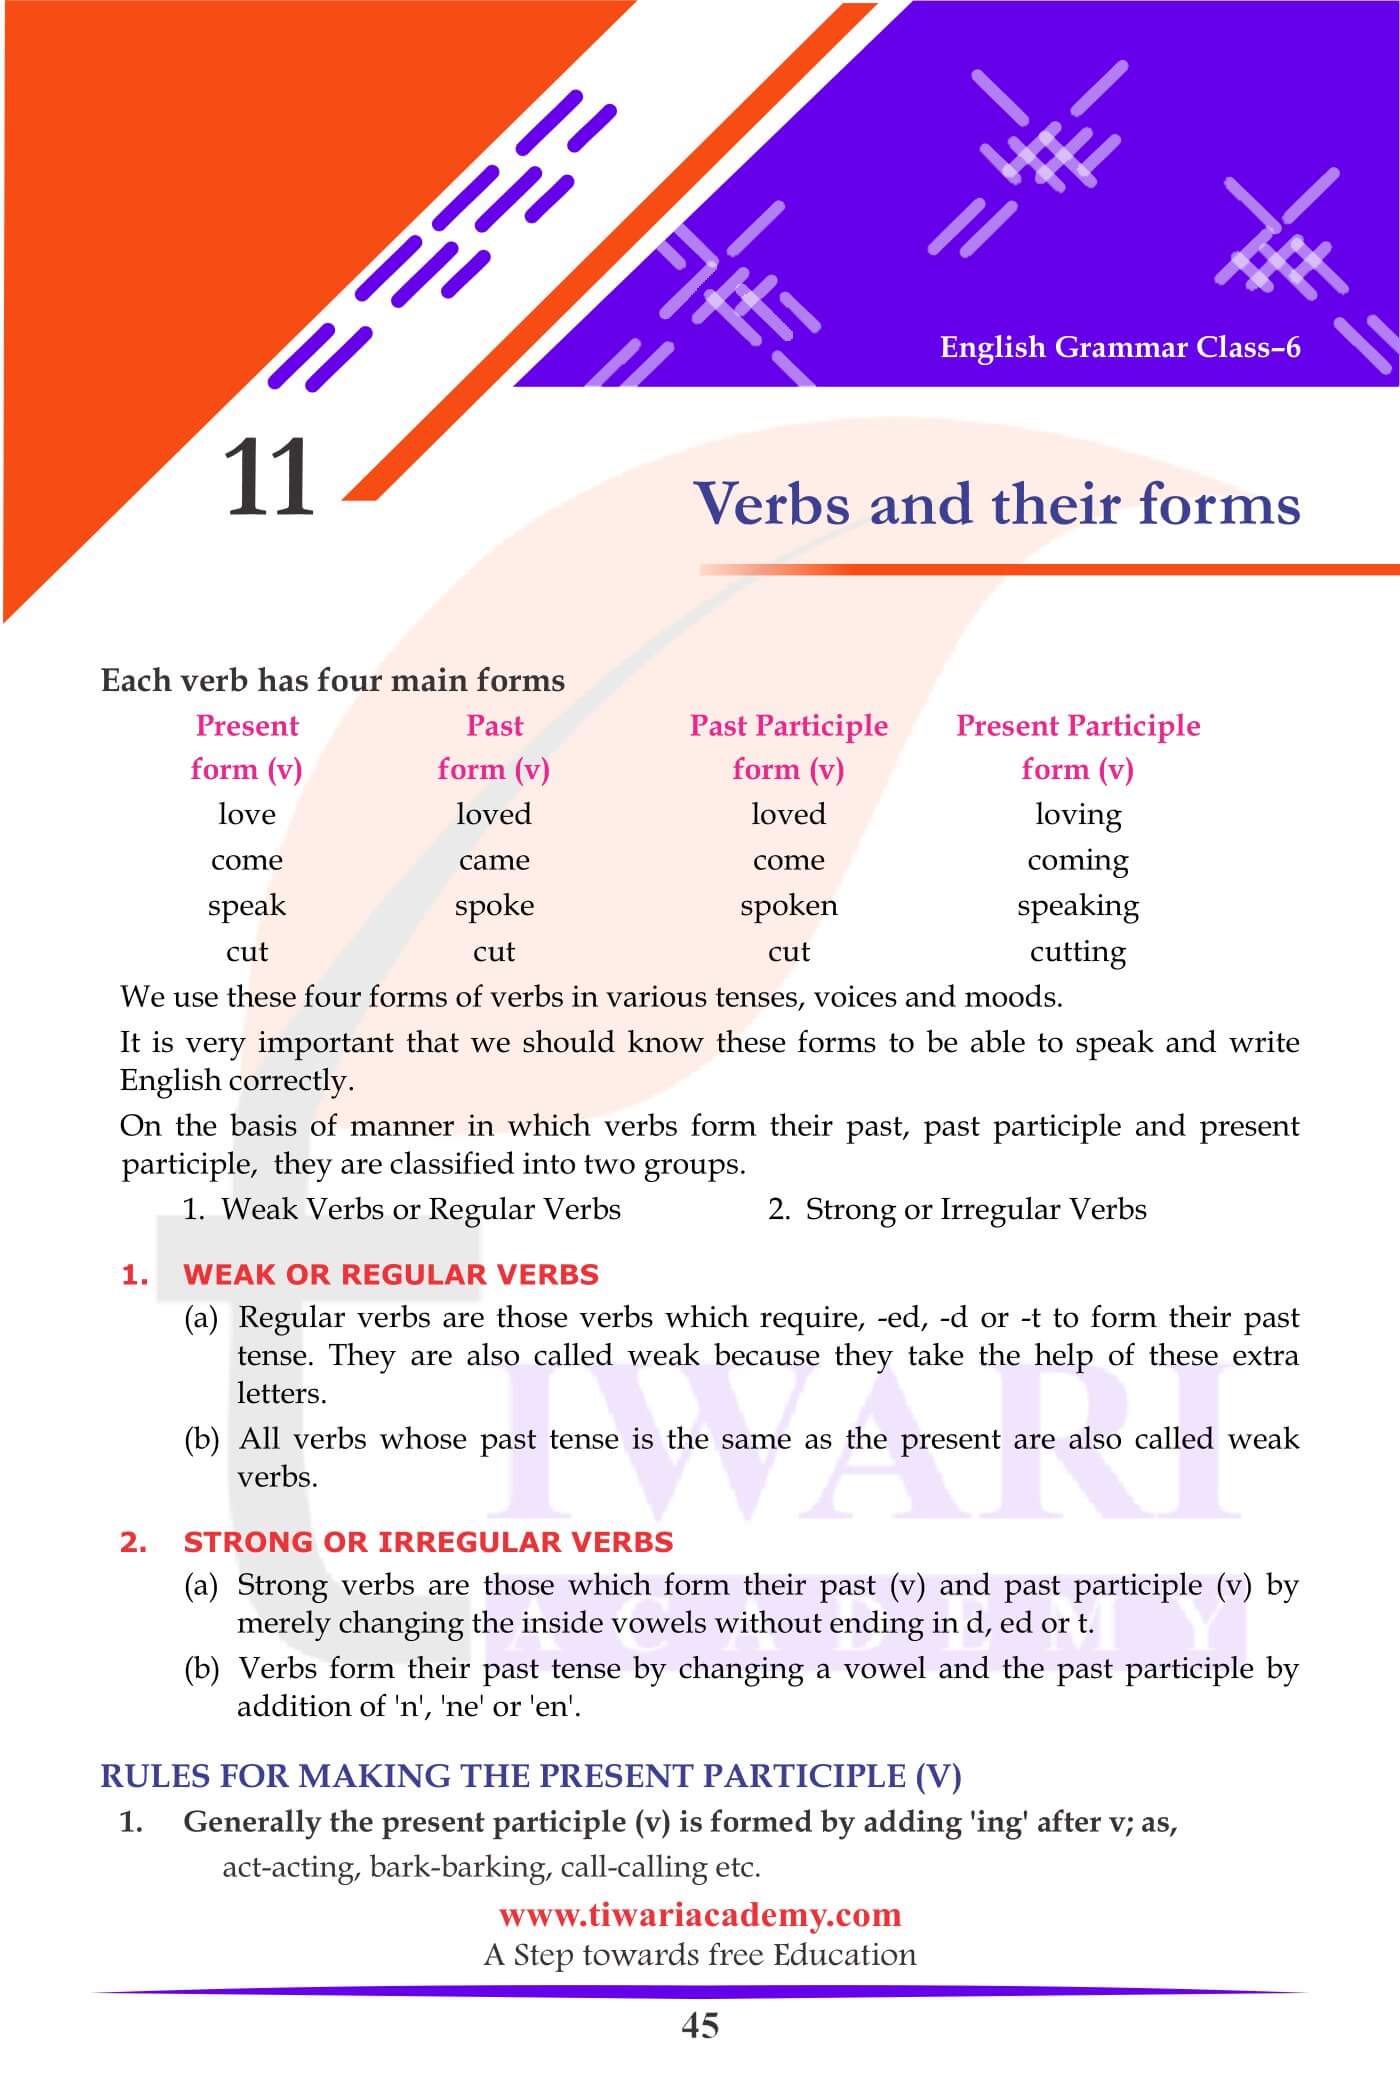 Class 6 English Grammar Chapter 11 Verbs and their Forms